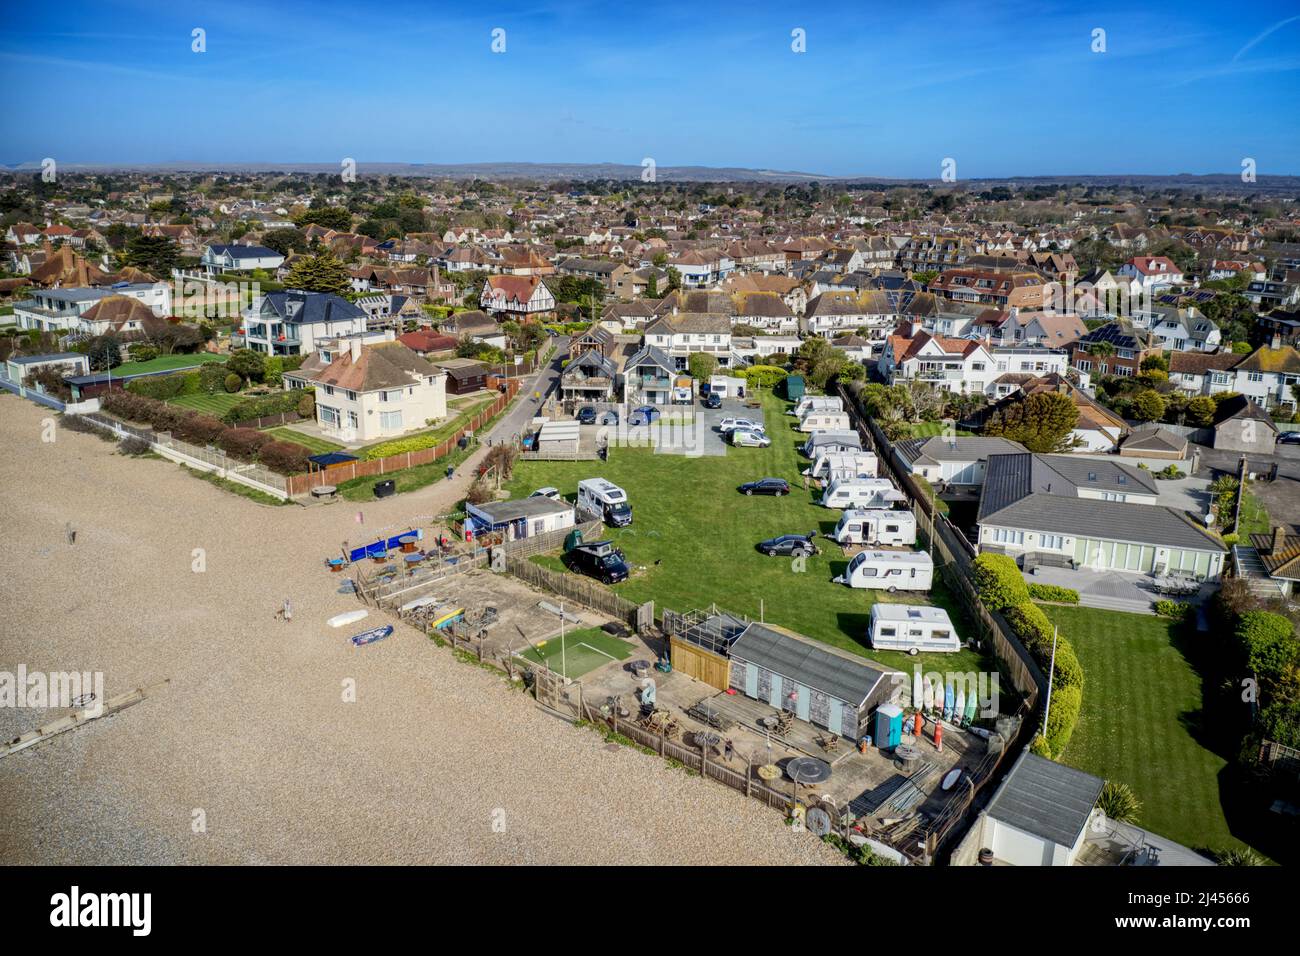 East Preston seafront village in West Sussex with the Coastal Camping site in view next to a cafe. Aerial Stock Photo